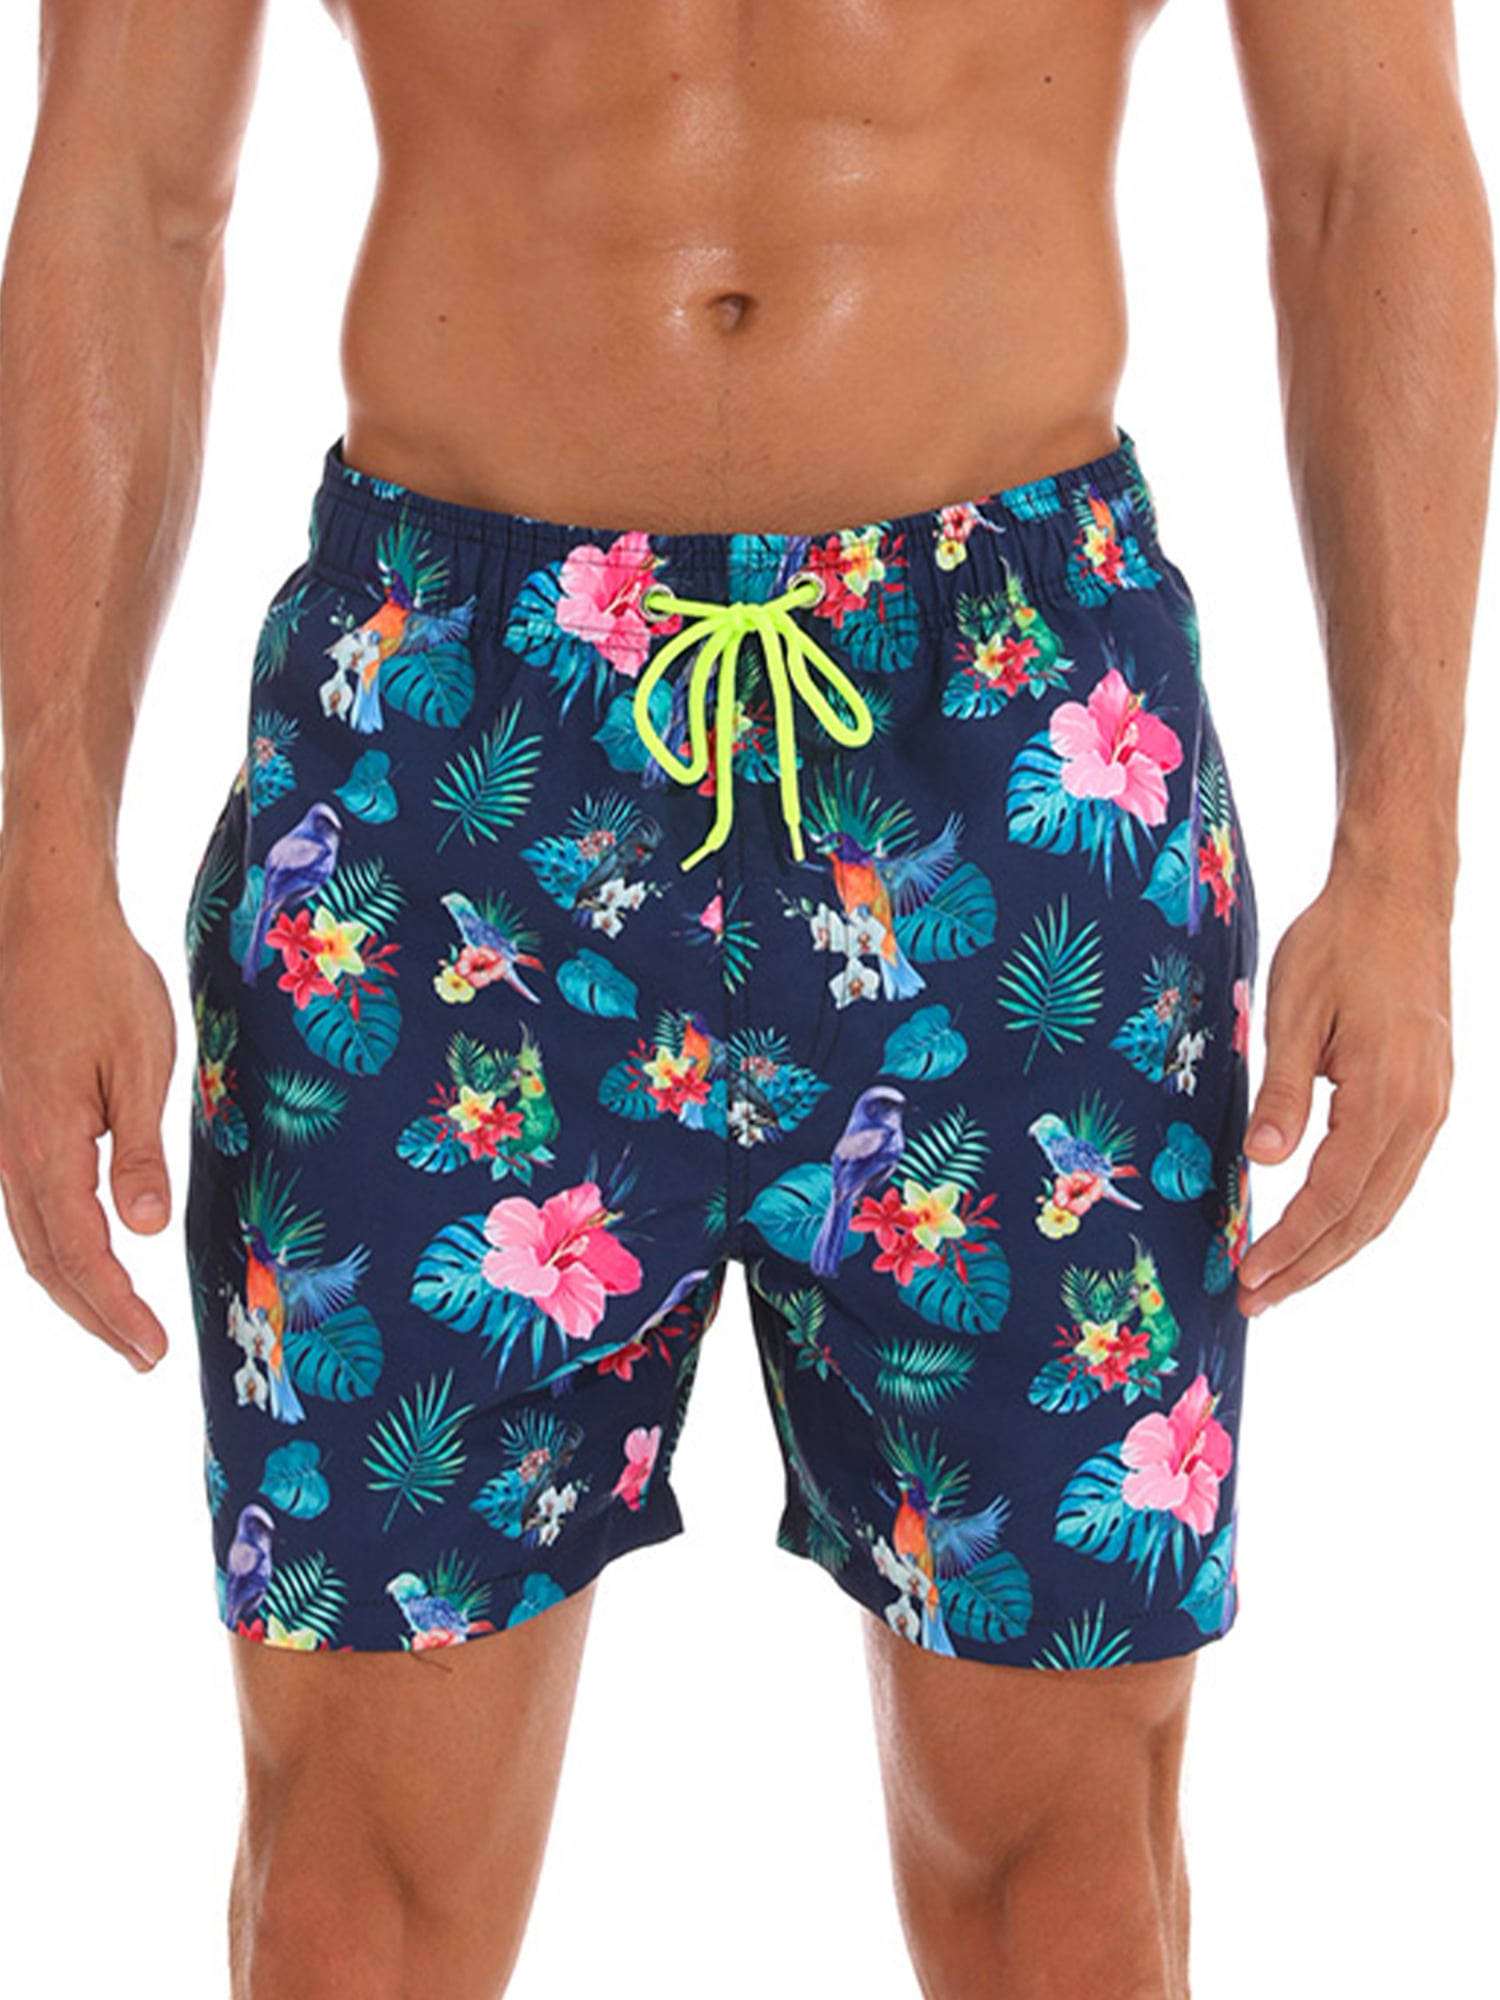 Mens Novelty Swimwear Swimtrunks A Bunch of Cats Water Resistant Exercise Casual Beach Summer with Pockets